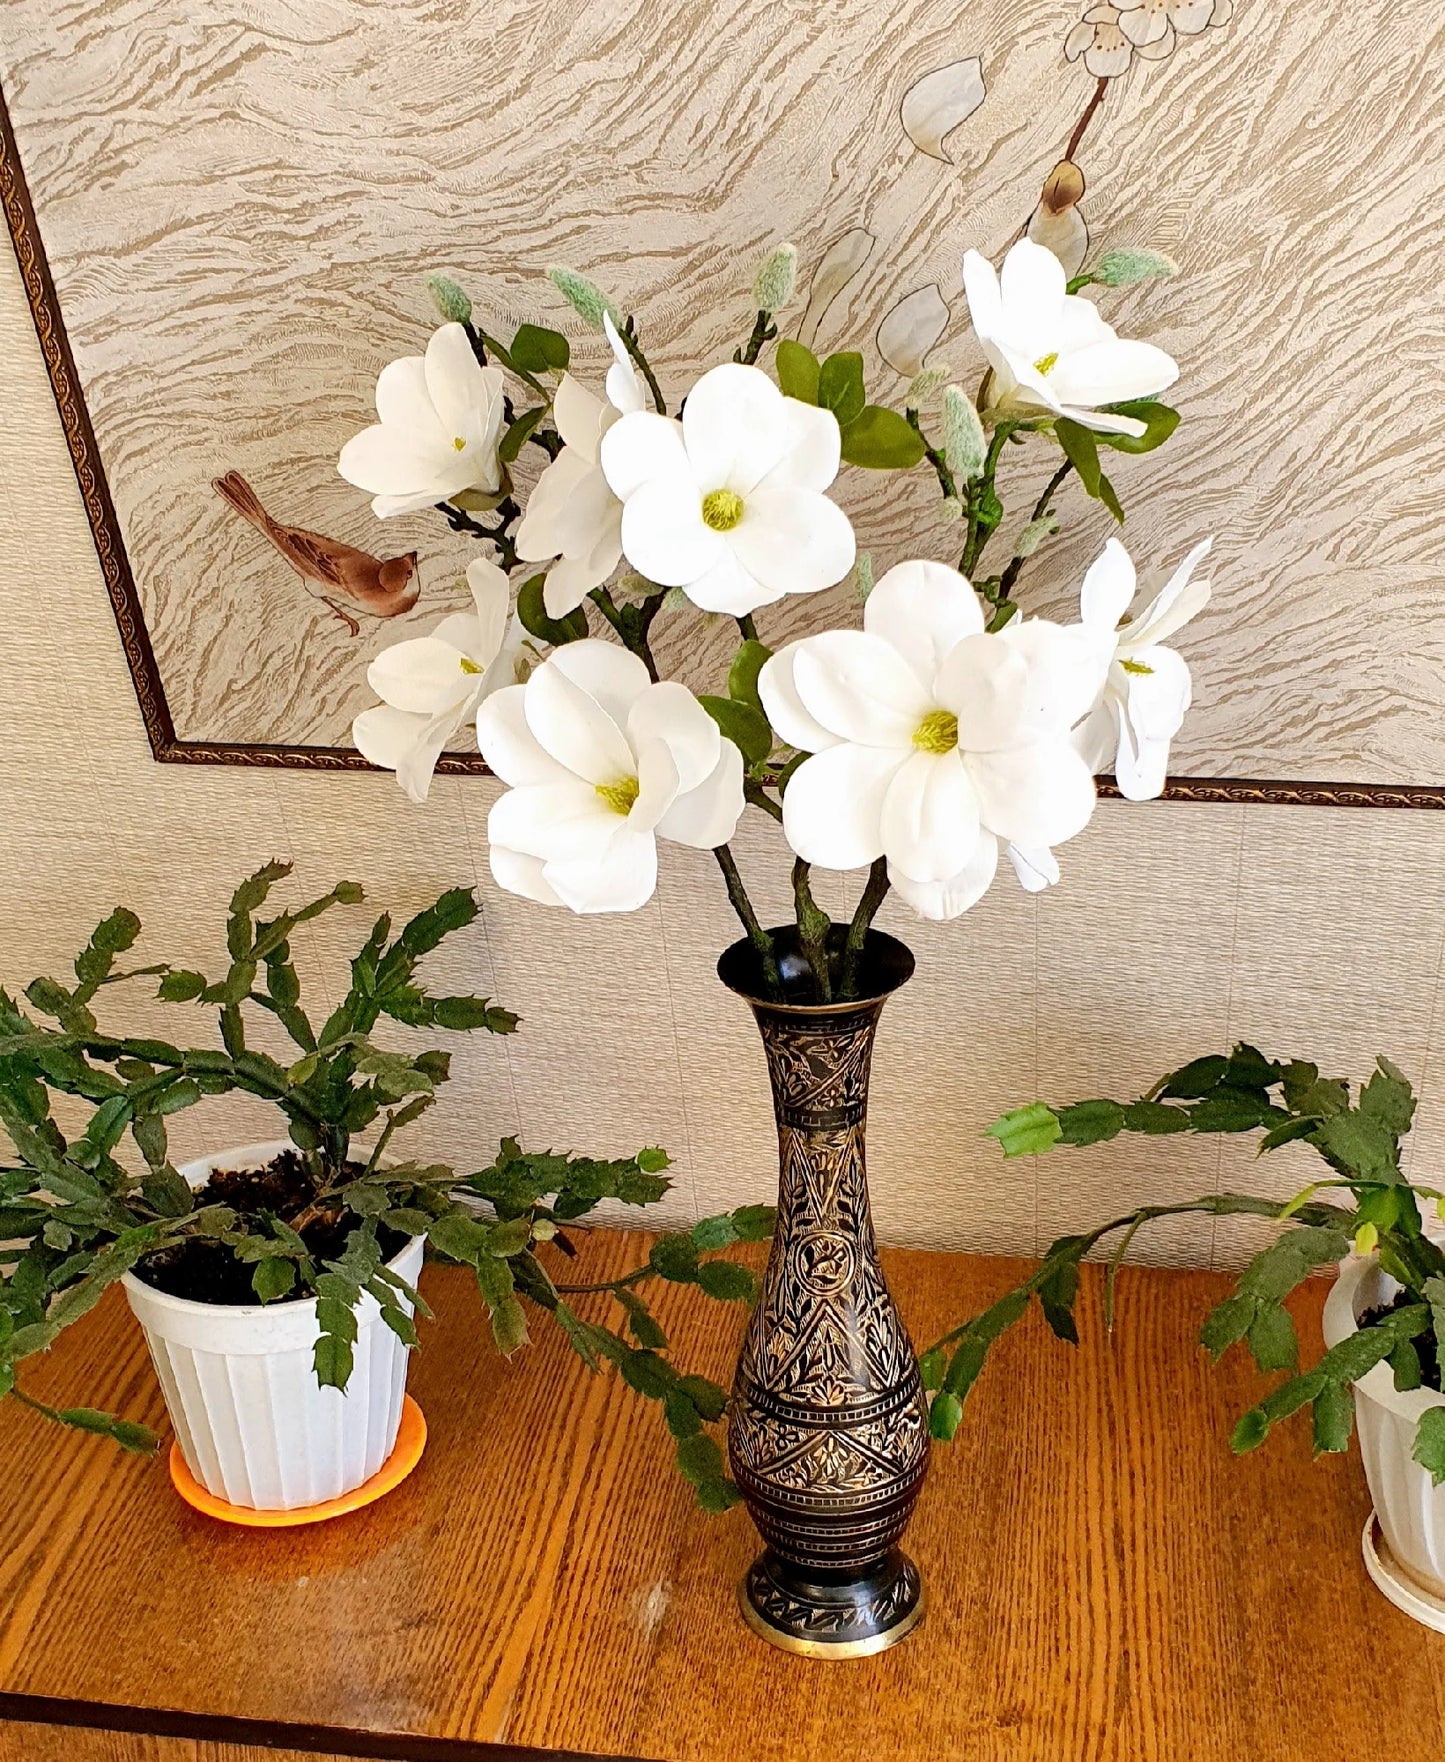 Artificial flower, magnolia/white, stem 56cm with 3 flowers, pack of 3 stems